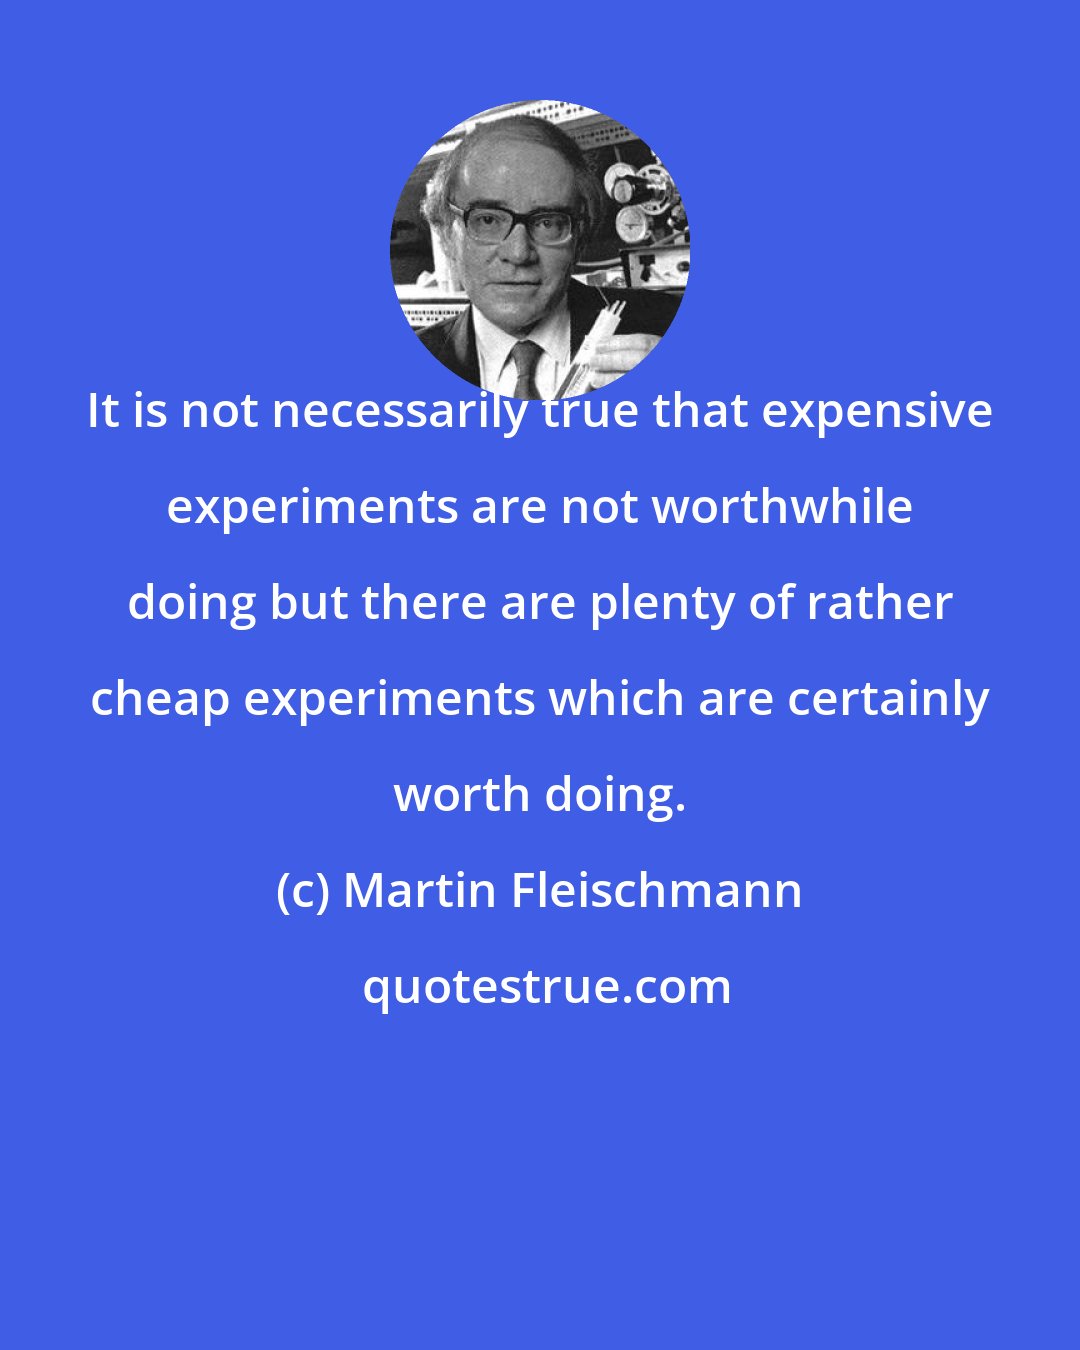 Martin Fleischmann: It is not necessarily true that expensive experiments are not worthwhile doing but there are plenty of rather cheap experiments which are certainly worth doing.